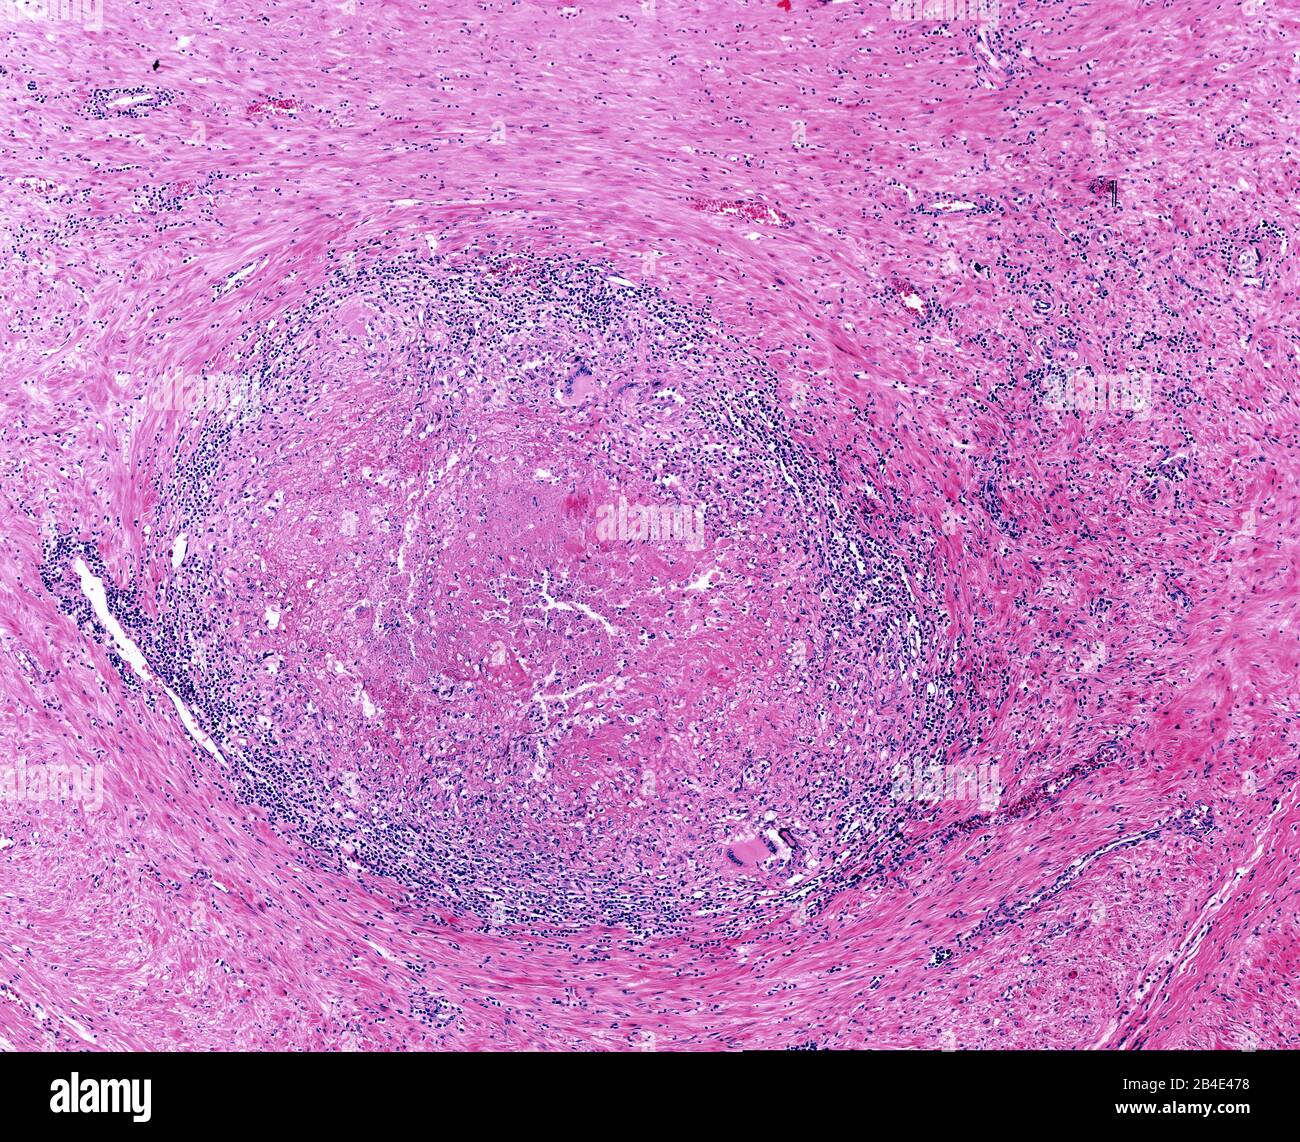 Tuberculosis Granuloma With A Central Necrosis Caseous Necrosis Lymphocytic Infiltrate And Multinucleated Langhans Cell Stock Photo Alamy